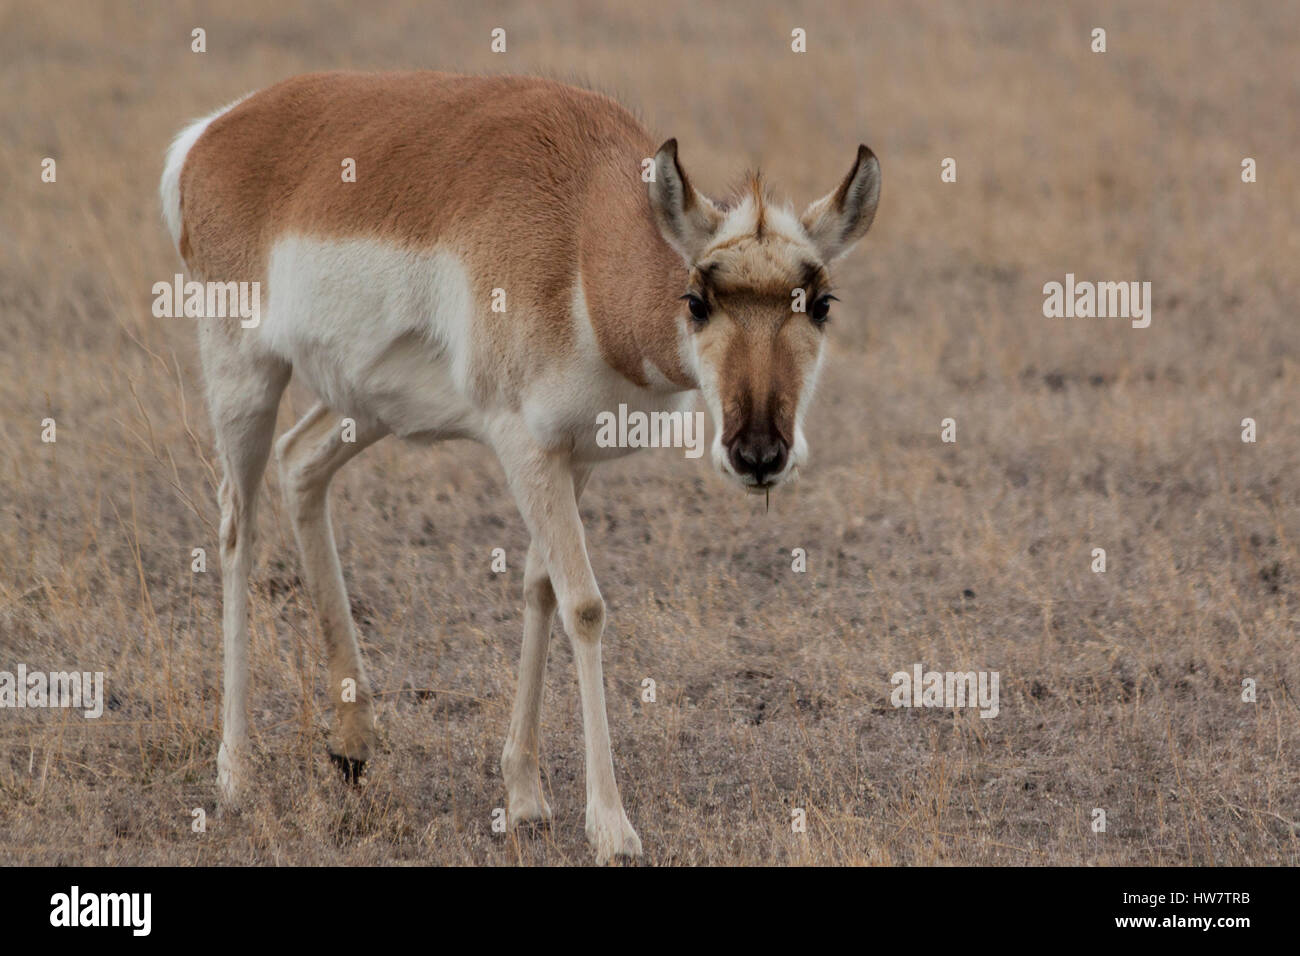 Female pronghorn checking out her photographers, Yellowstone National Park. Stock Photo